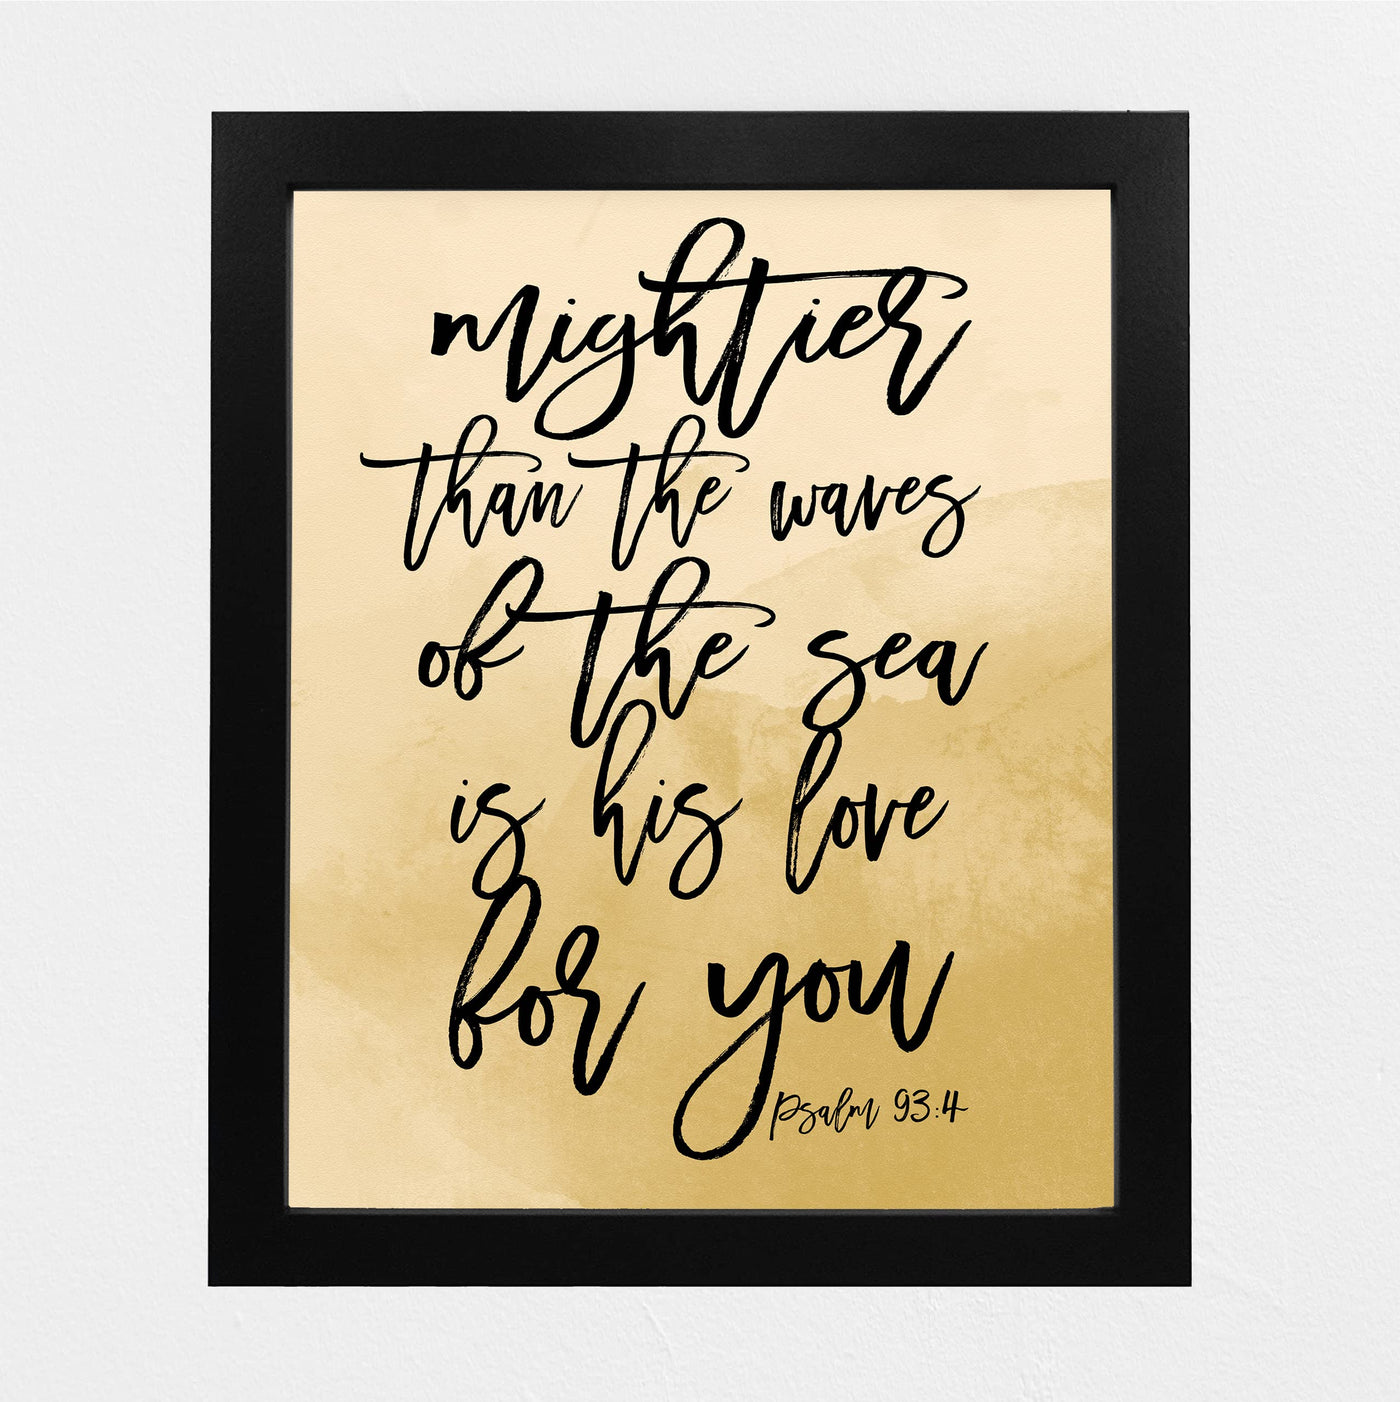 Mightier Than the Waves of the Sea-Bible Verse Wall Art -8x10" -Religious Scripture Print -Ready to Frame. Christian Home-Office-Church Decor. Great Inspirational Gift of Faith! Psalm 93:4